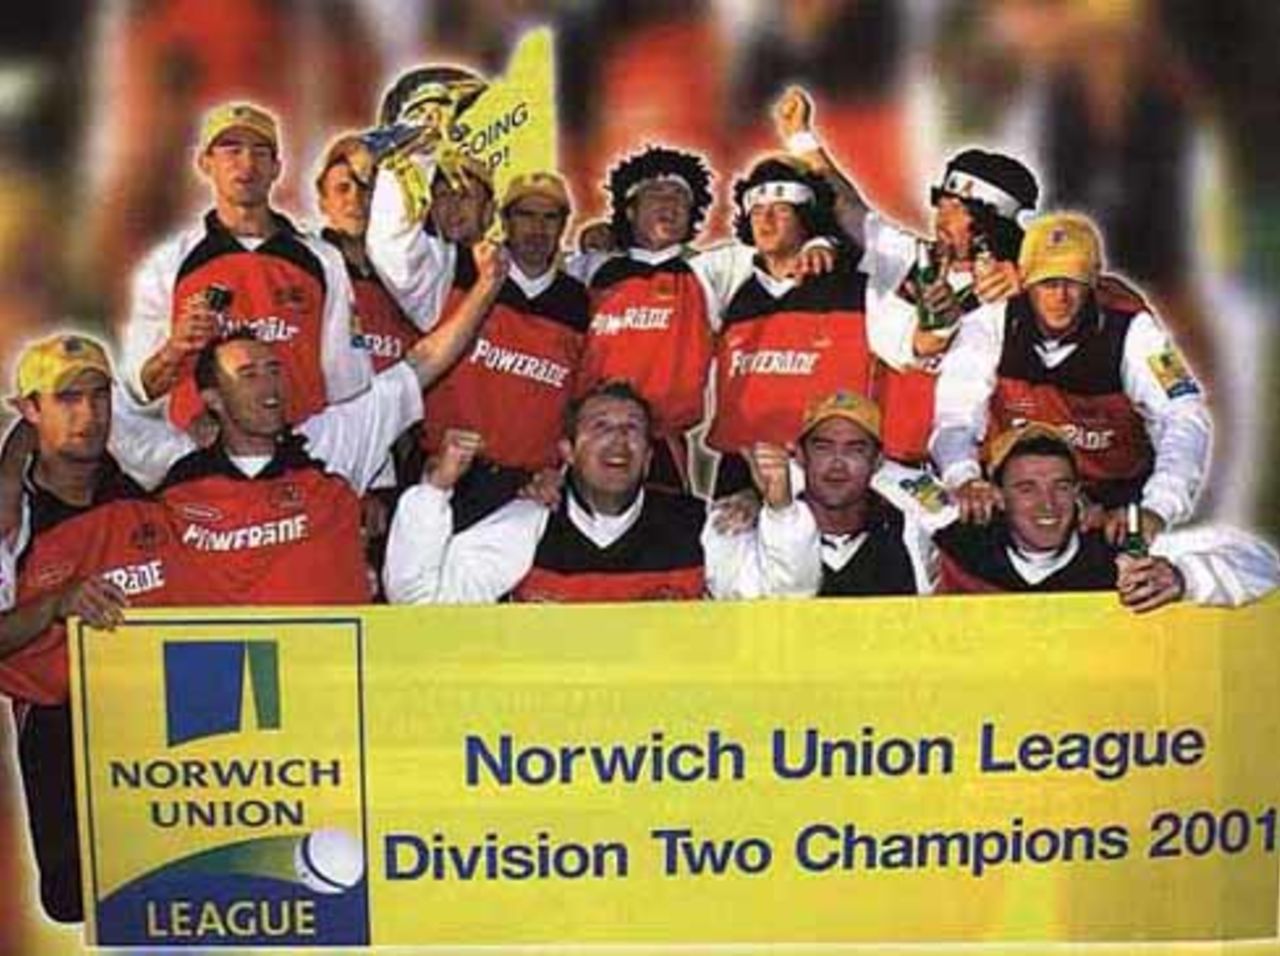 Glamorgan , the winners of the Norwich Union league Division Two , 2001